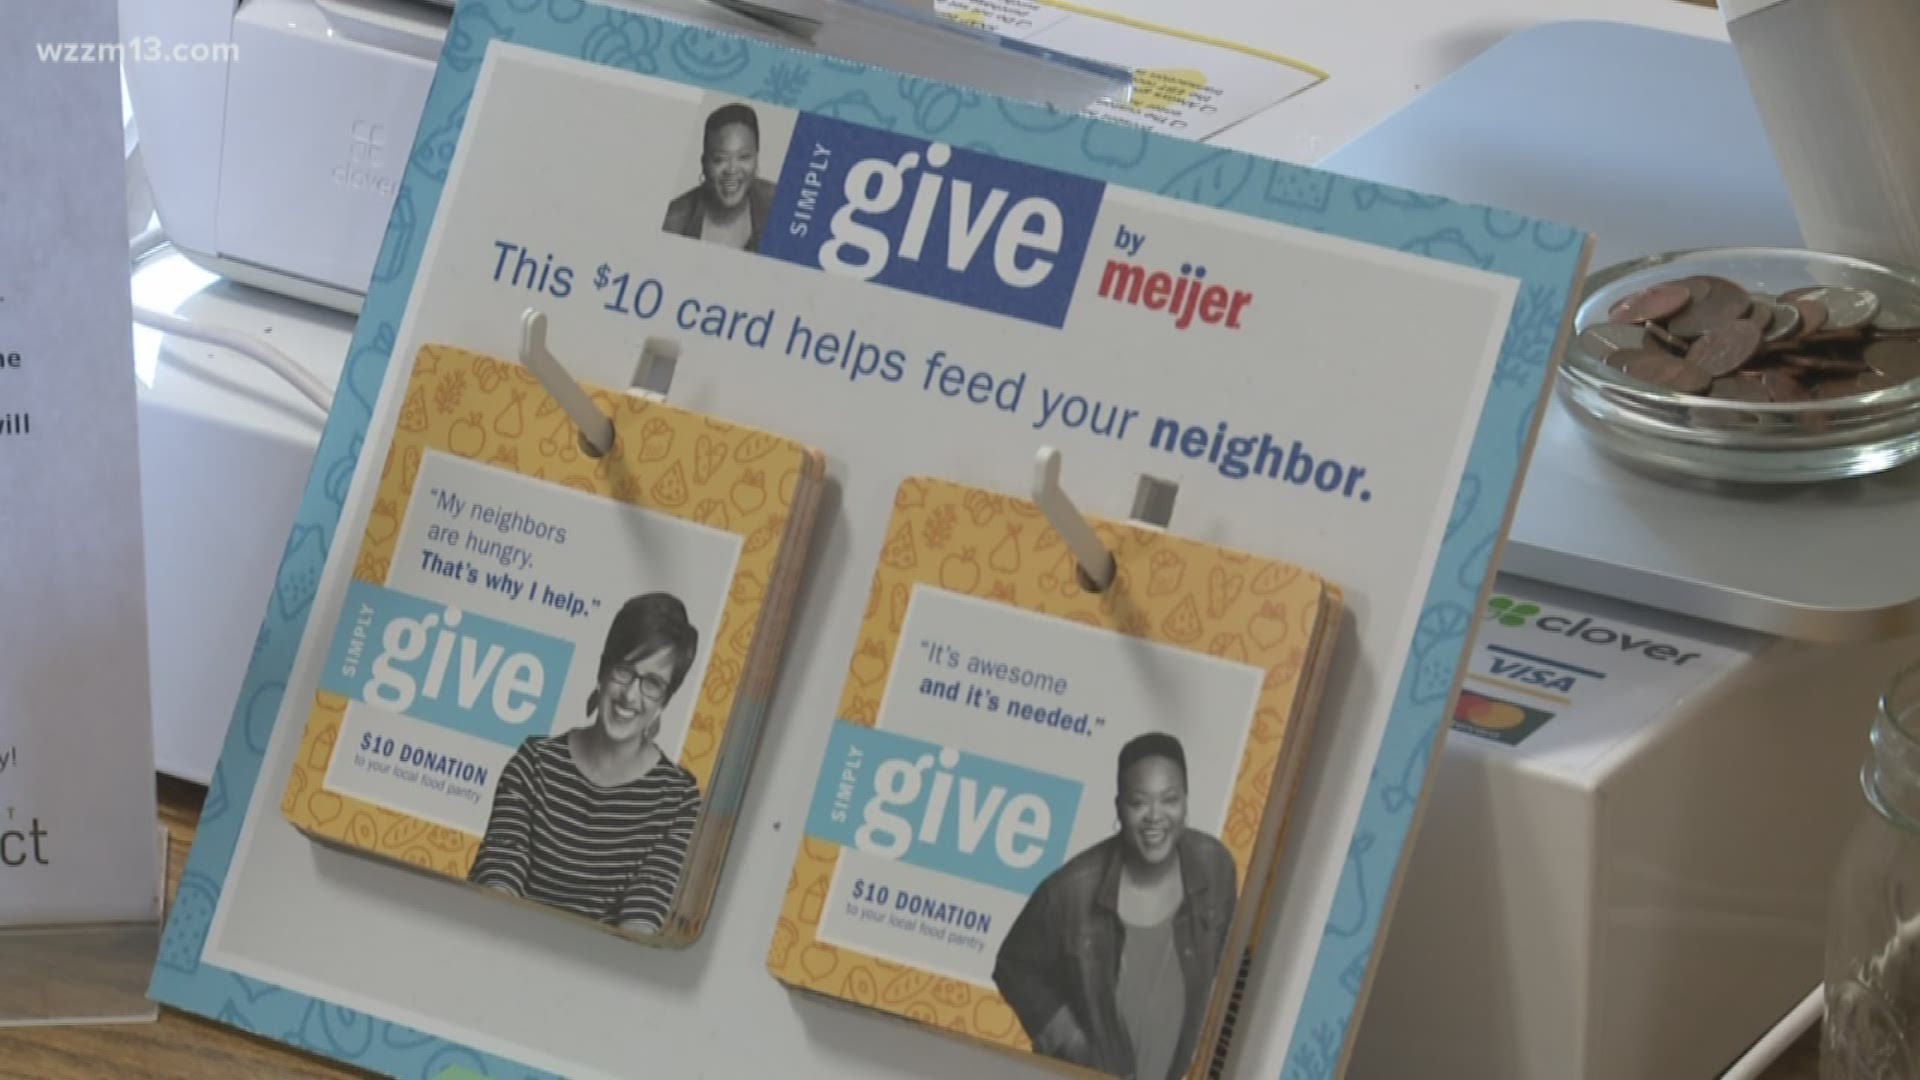 In just a couple of days Blythefield Country Club will host the Meijer LPGA Classic for Simply Give. The June 11-16, 2019 tournament will feature some of the best female golfers in the world and give golf fans as well as Meijer shoppers a chance to participate in the Simply Give campaign to feed hungry families.